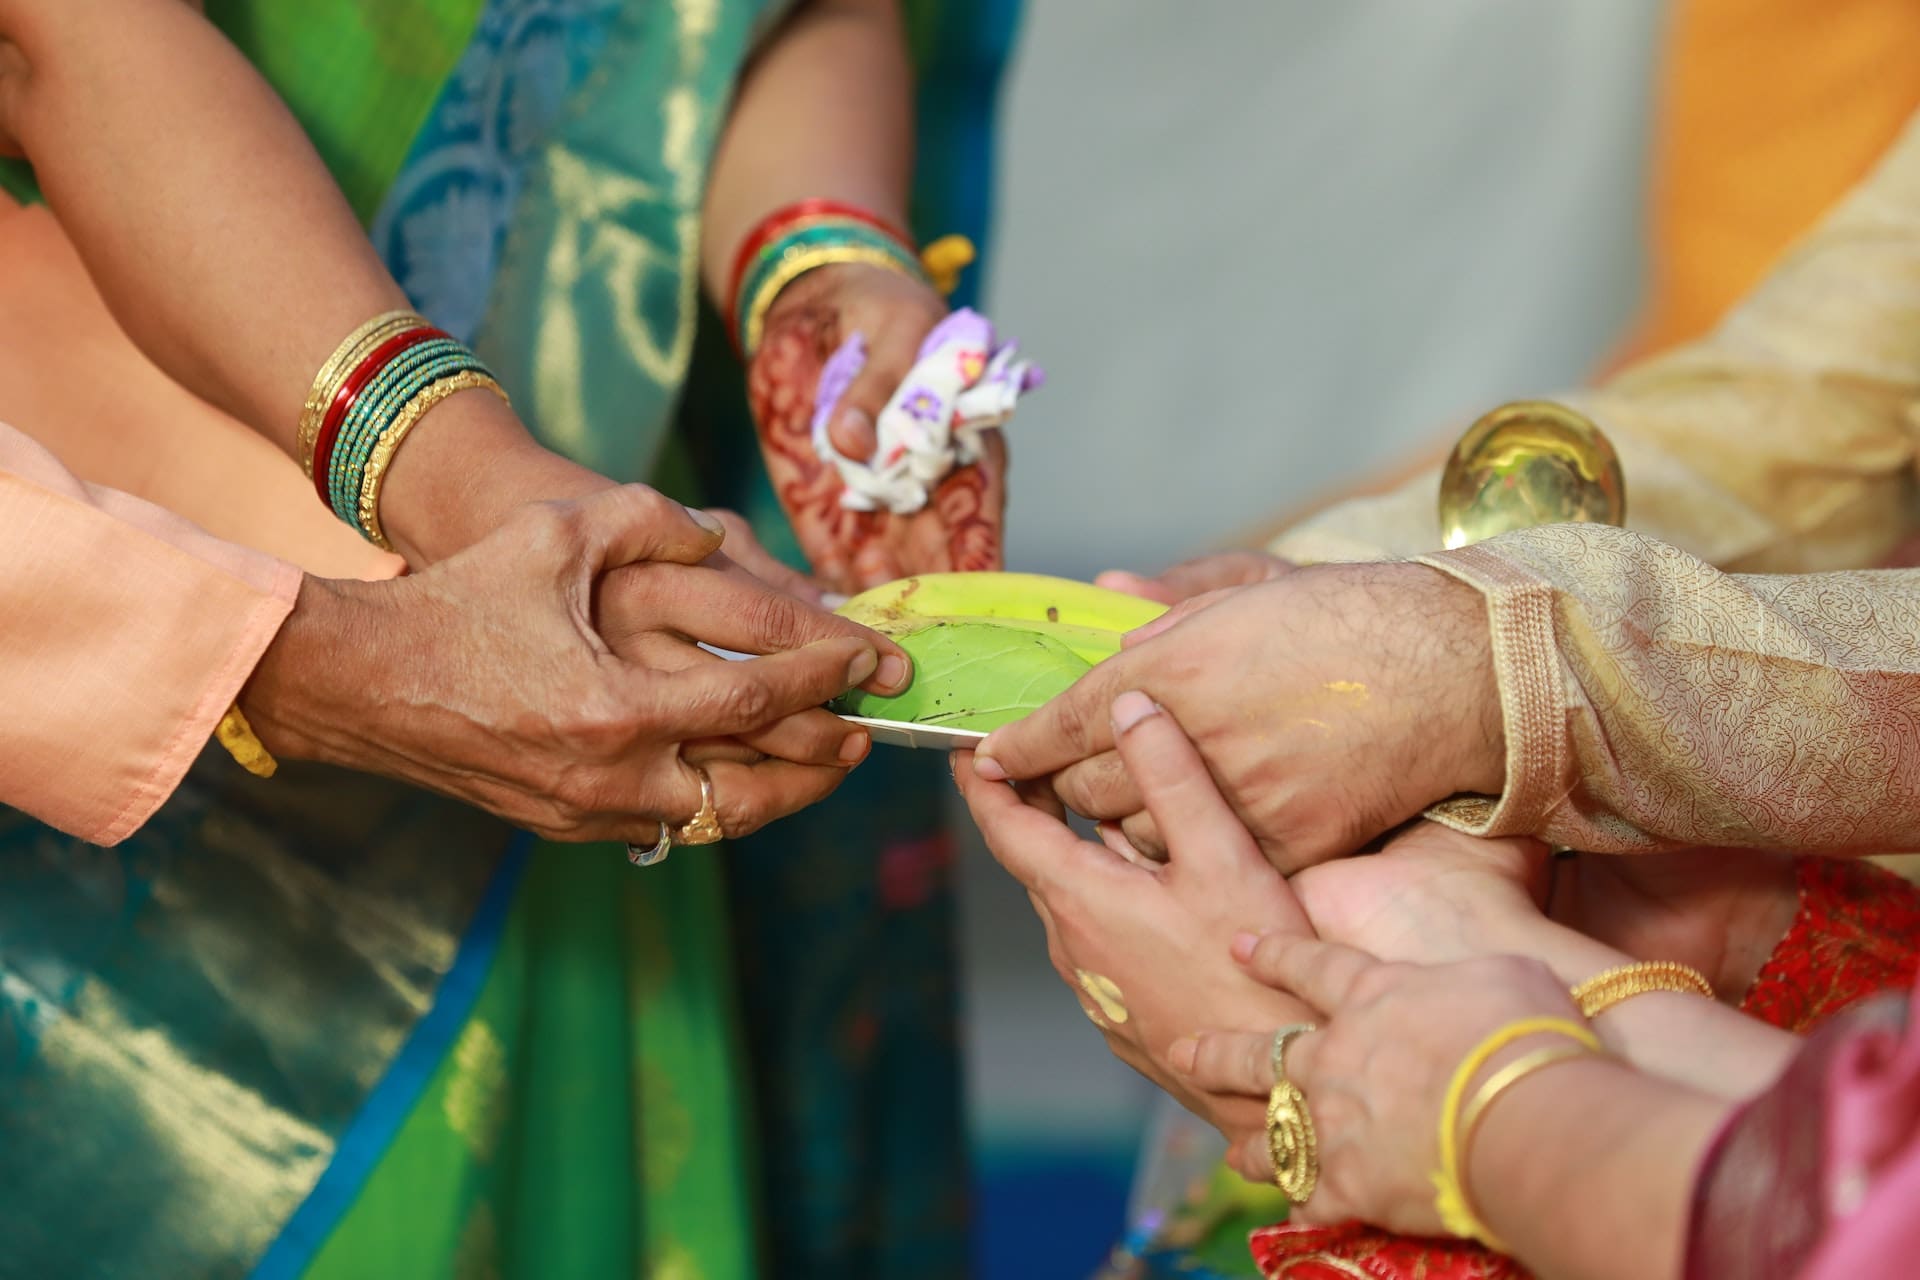 Section 2 of the Dowry Prohibition Act